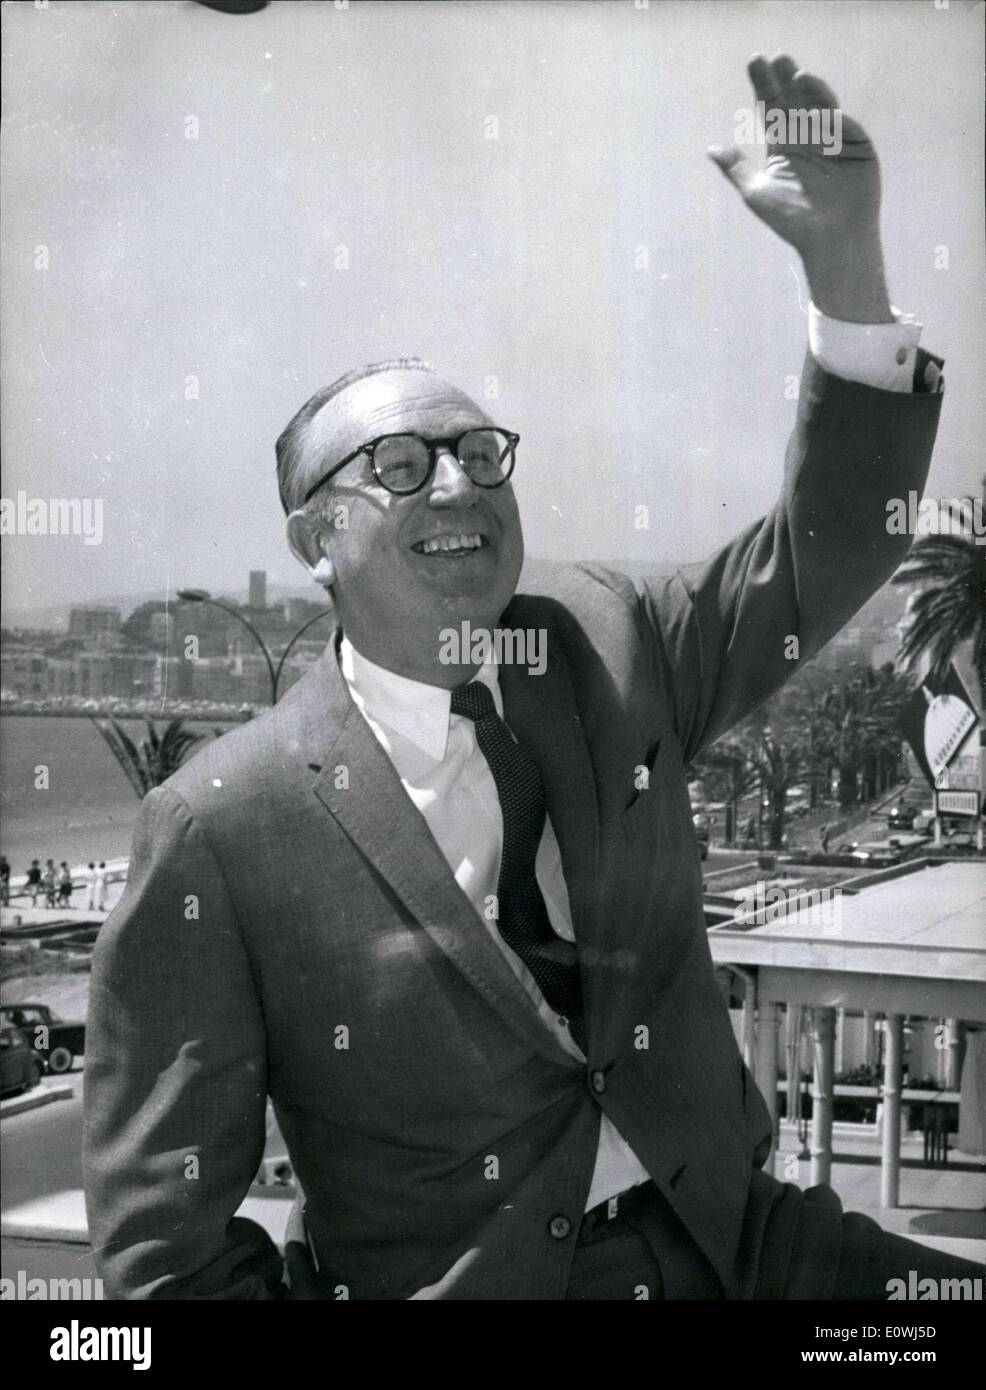 May 11, 1963 - Harold Lloyd, the famous American comedian will present a few of his movies at the Cannes Film Festival. He is pictured on the Carlton Terrace in Cannes. Stock Photo